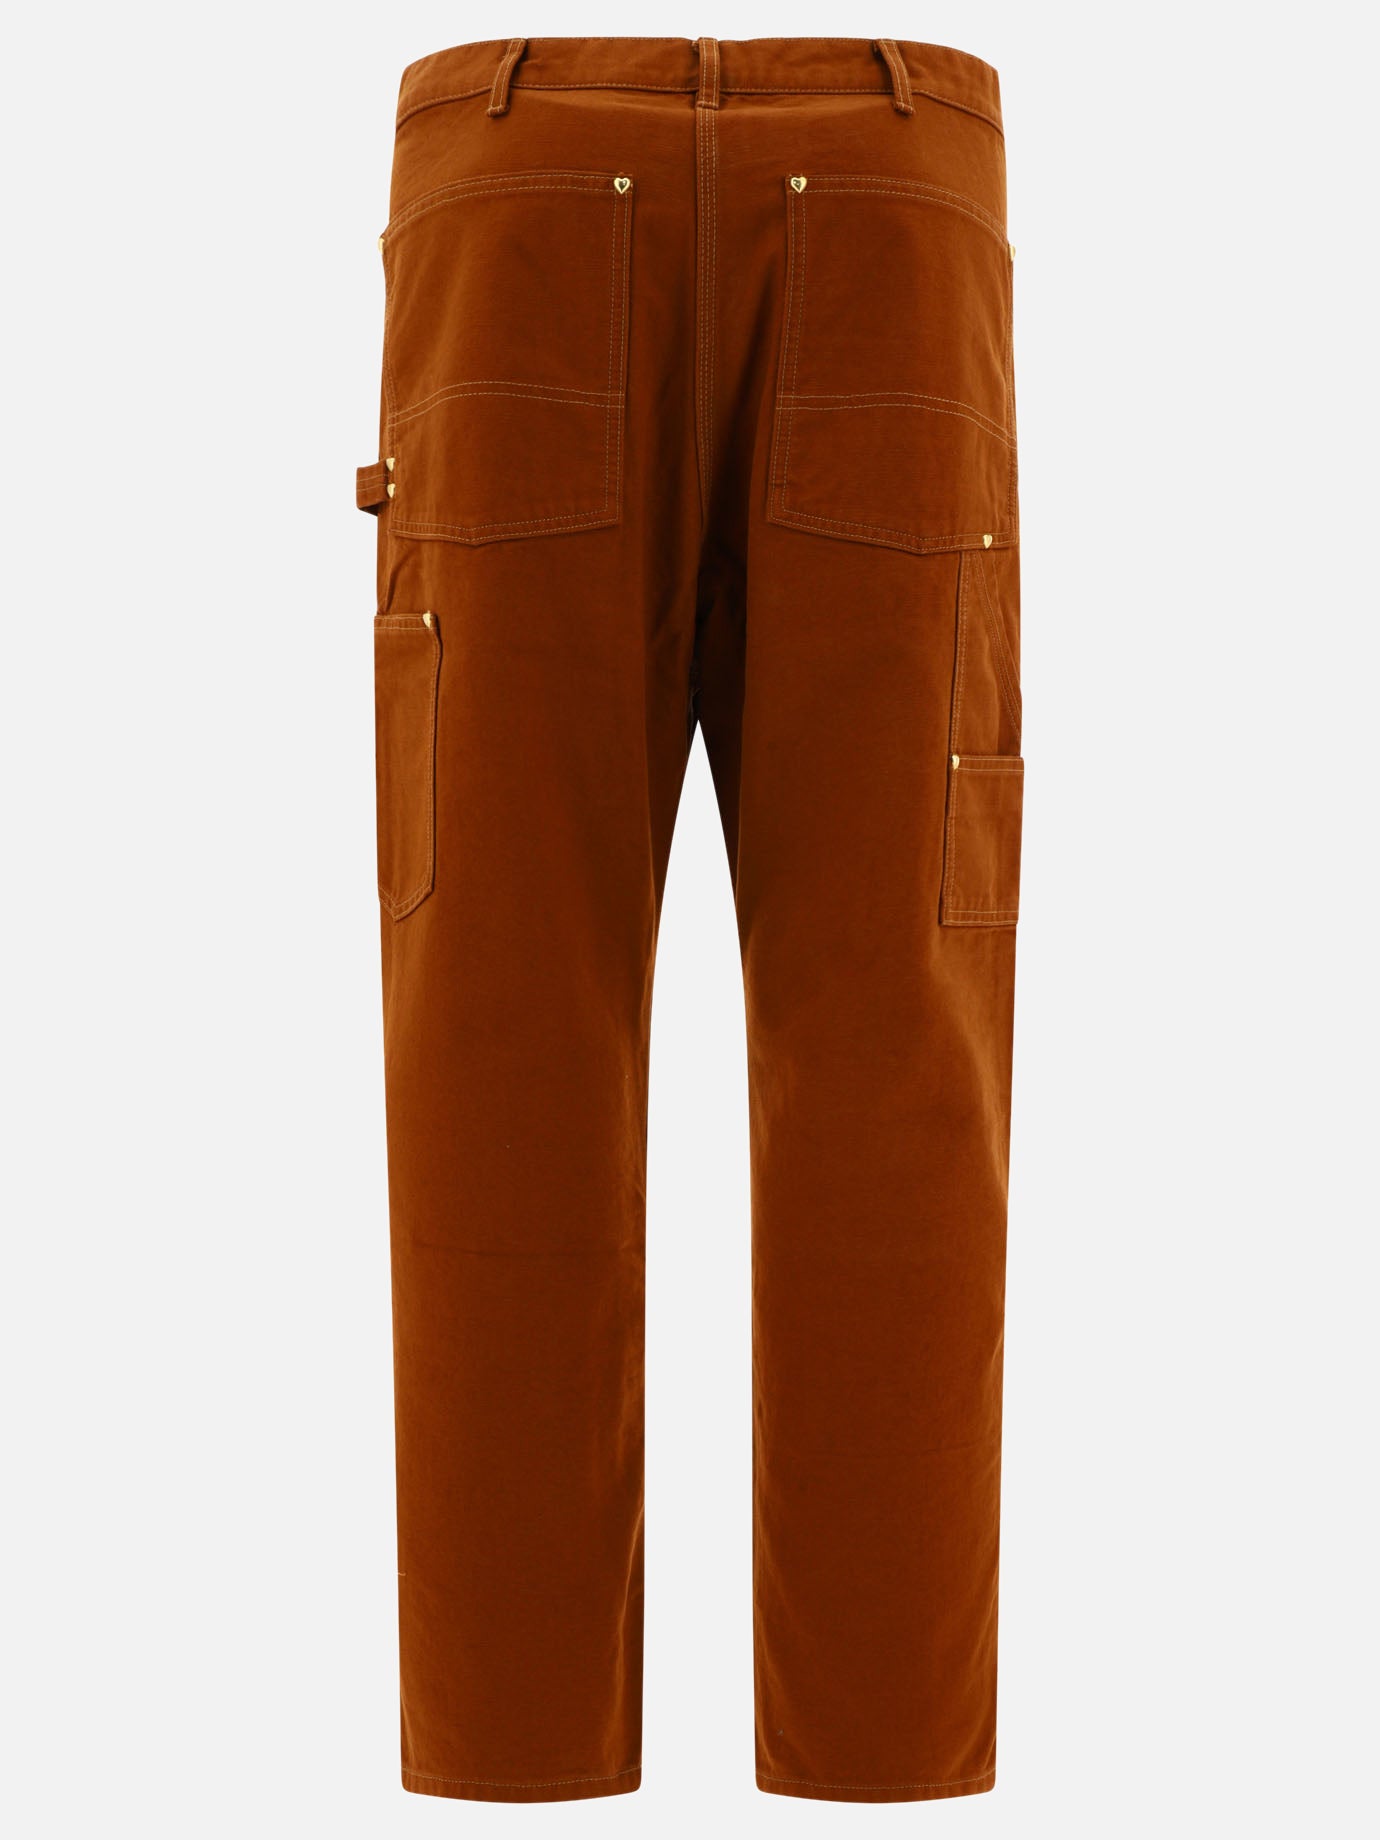 "Duck Painter" trousers